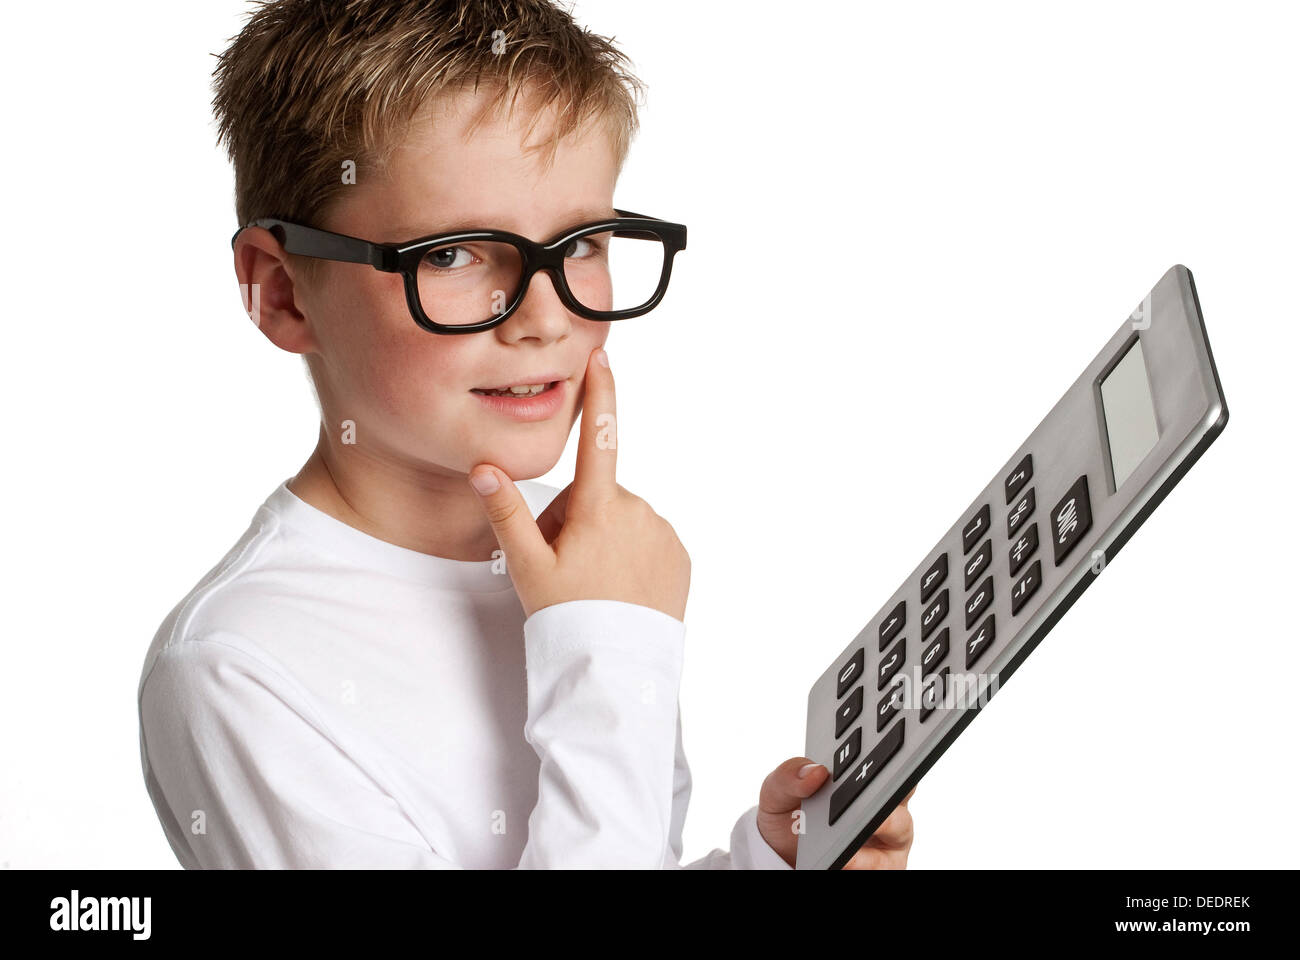 Clever looking boy with caculator. Shot in studio on white background. Stock Photo